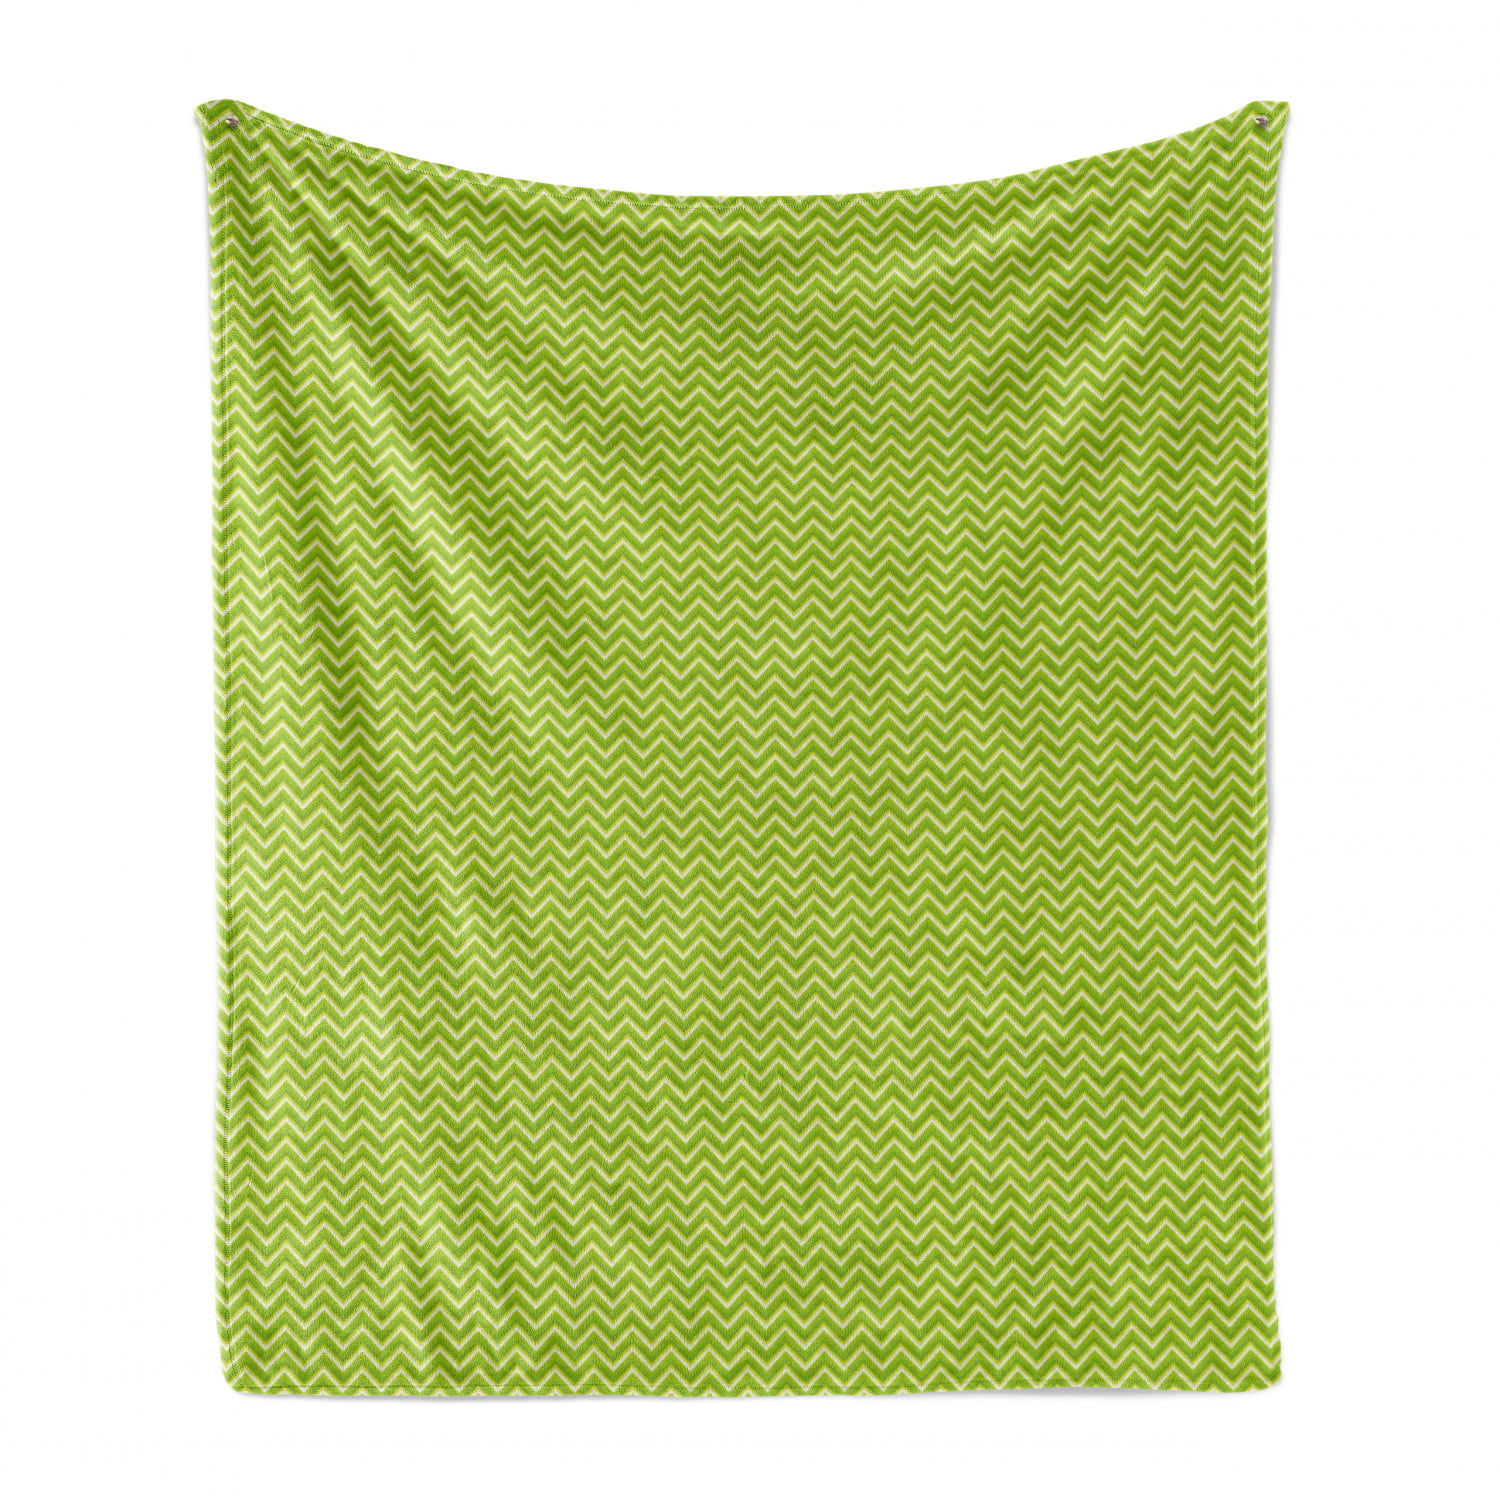 Monochrome Geometric Pattern with Diagonal Square Check 50 x 60 Green Almond Green Cozy Plush for Indoor and Outdoor Use Ambesonne Abstract Green Soft Flannel Fleece Throw Blanket 